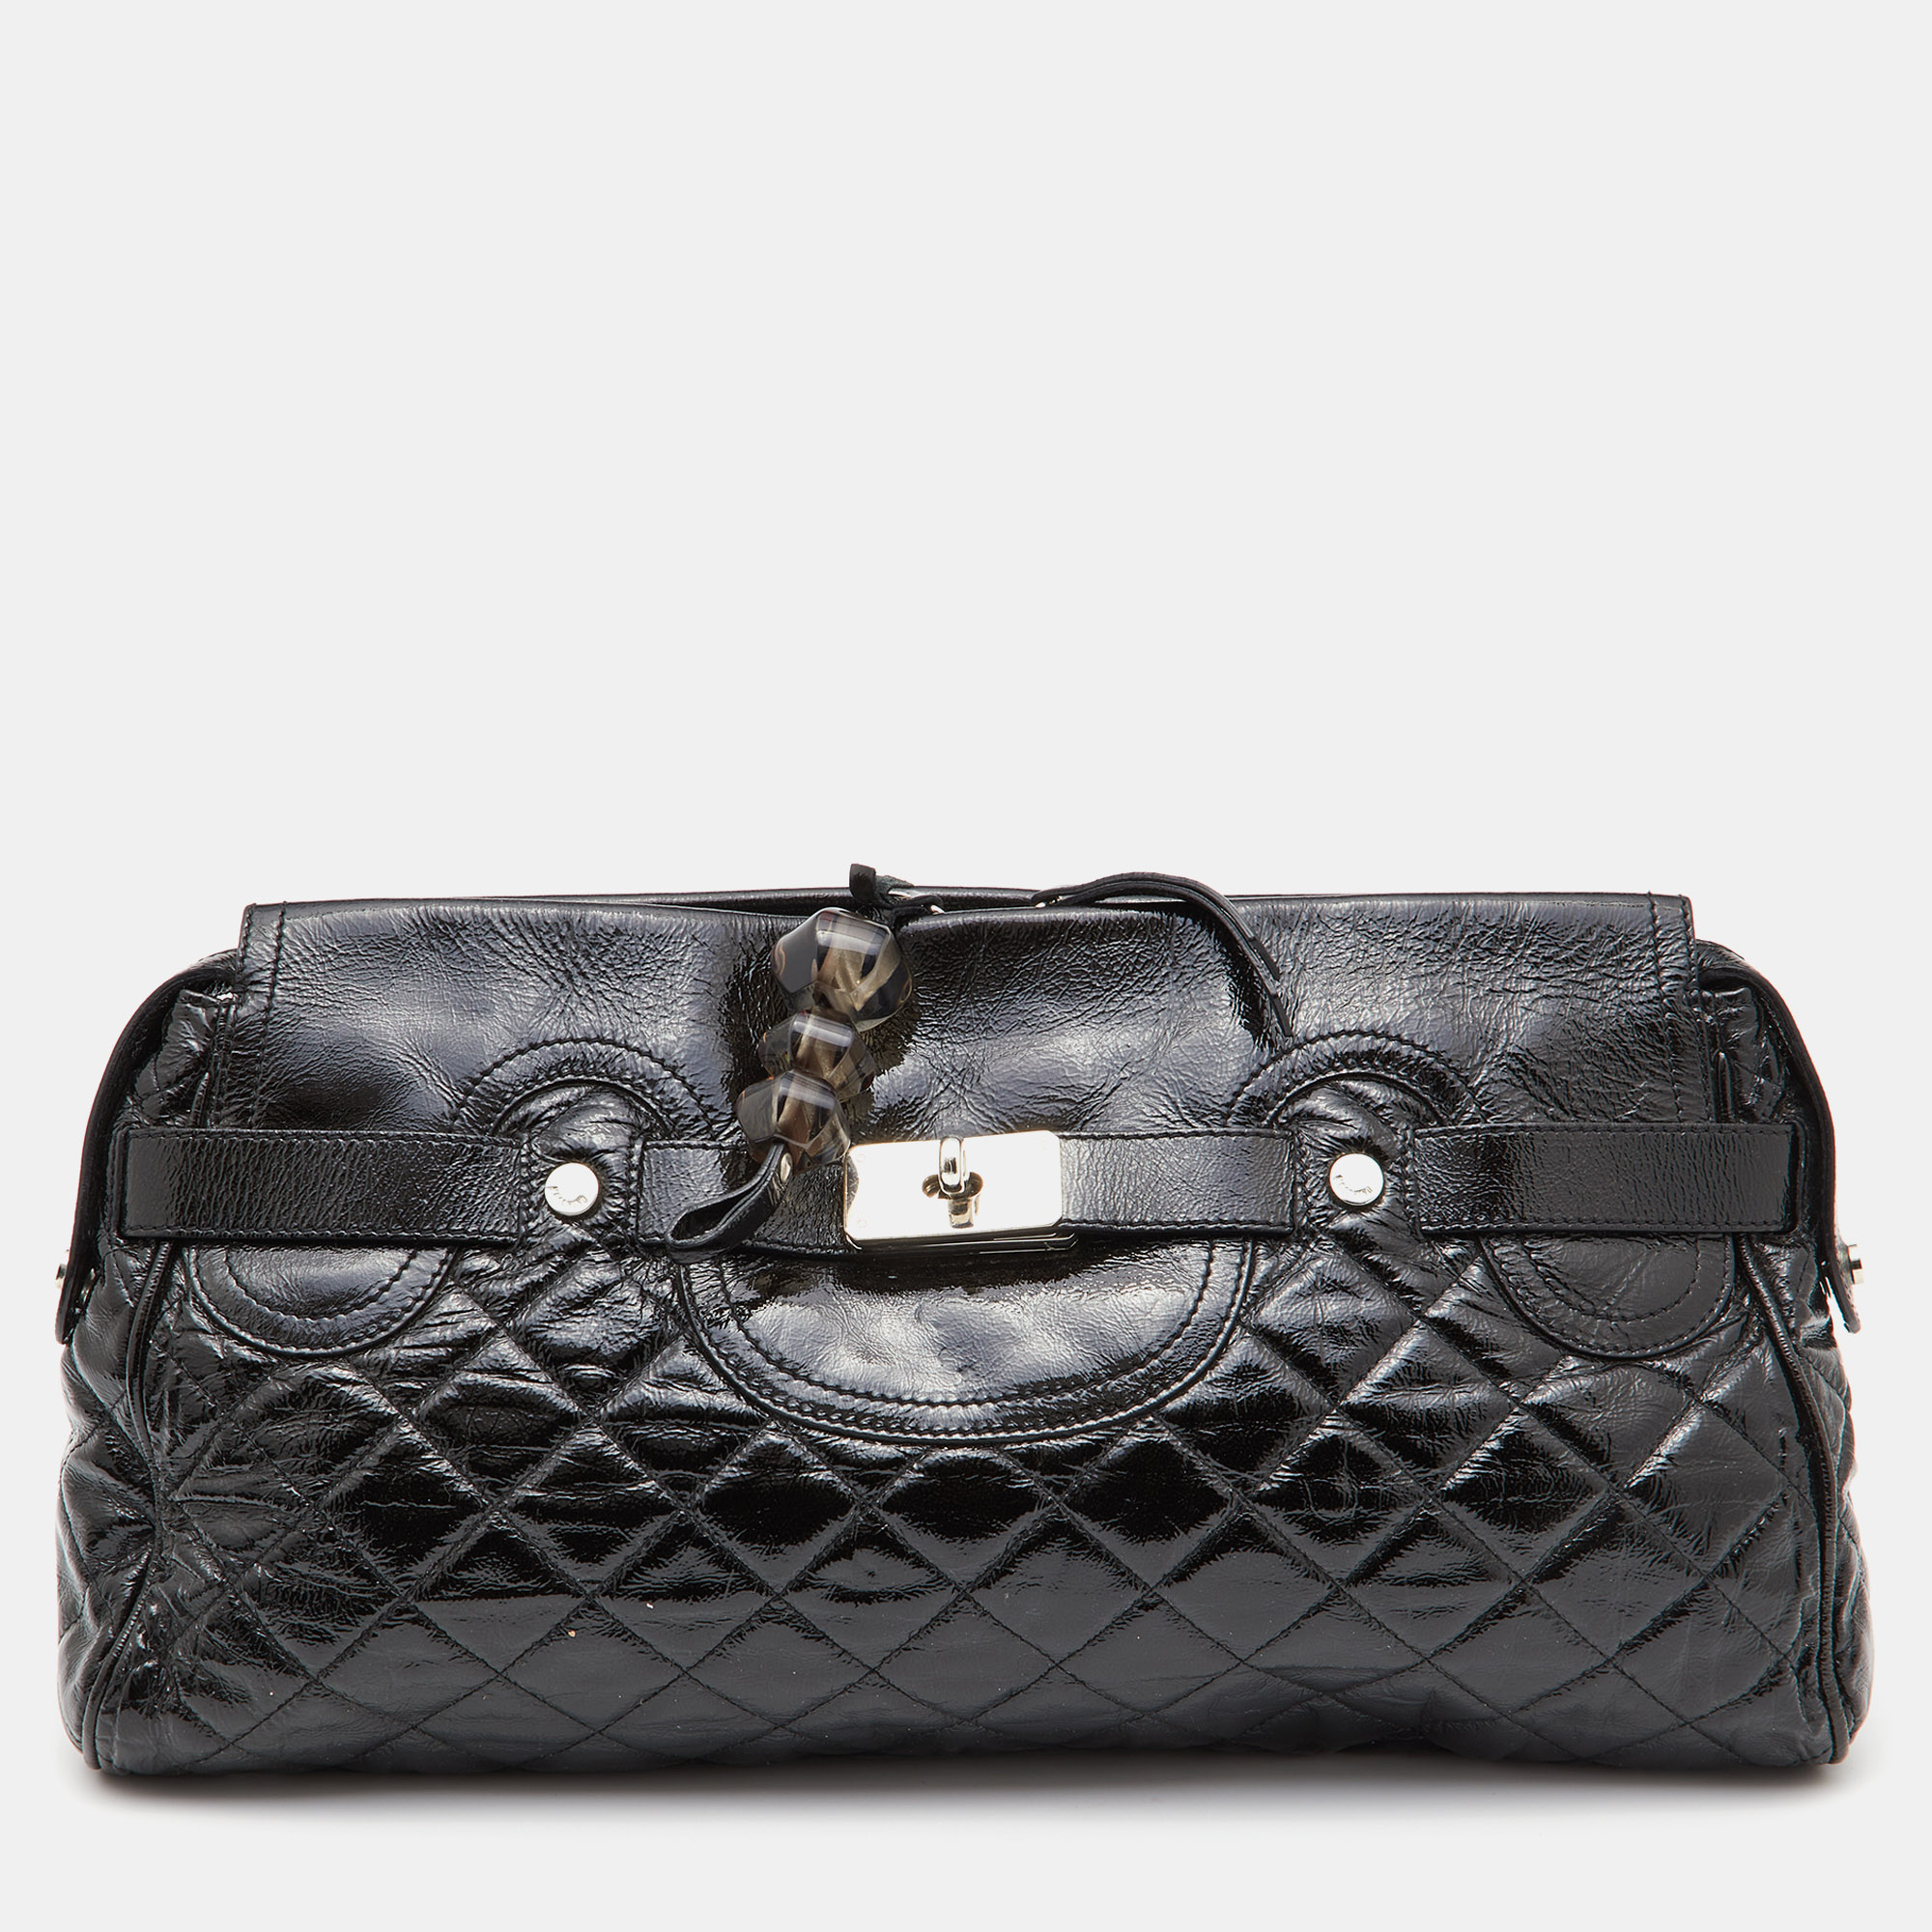 Pre-owned Moschino Black Quilted Patent Leather Oversize Clutch